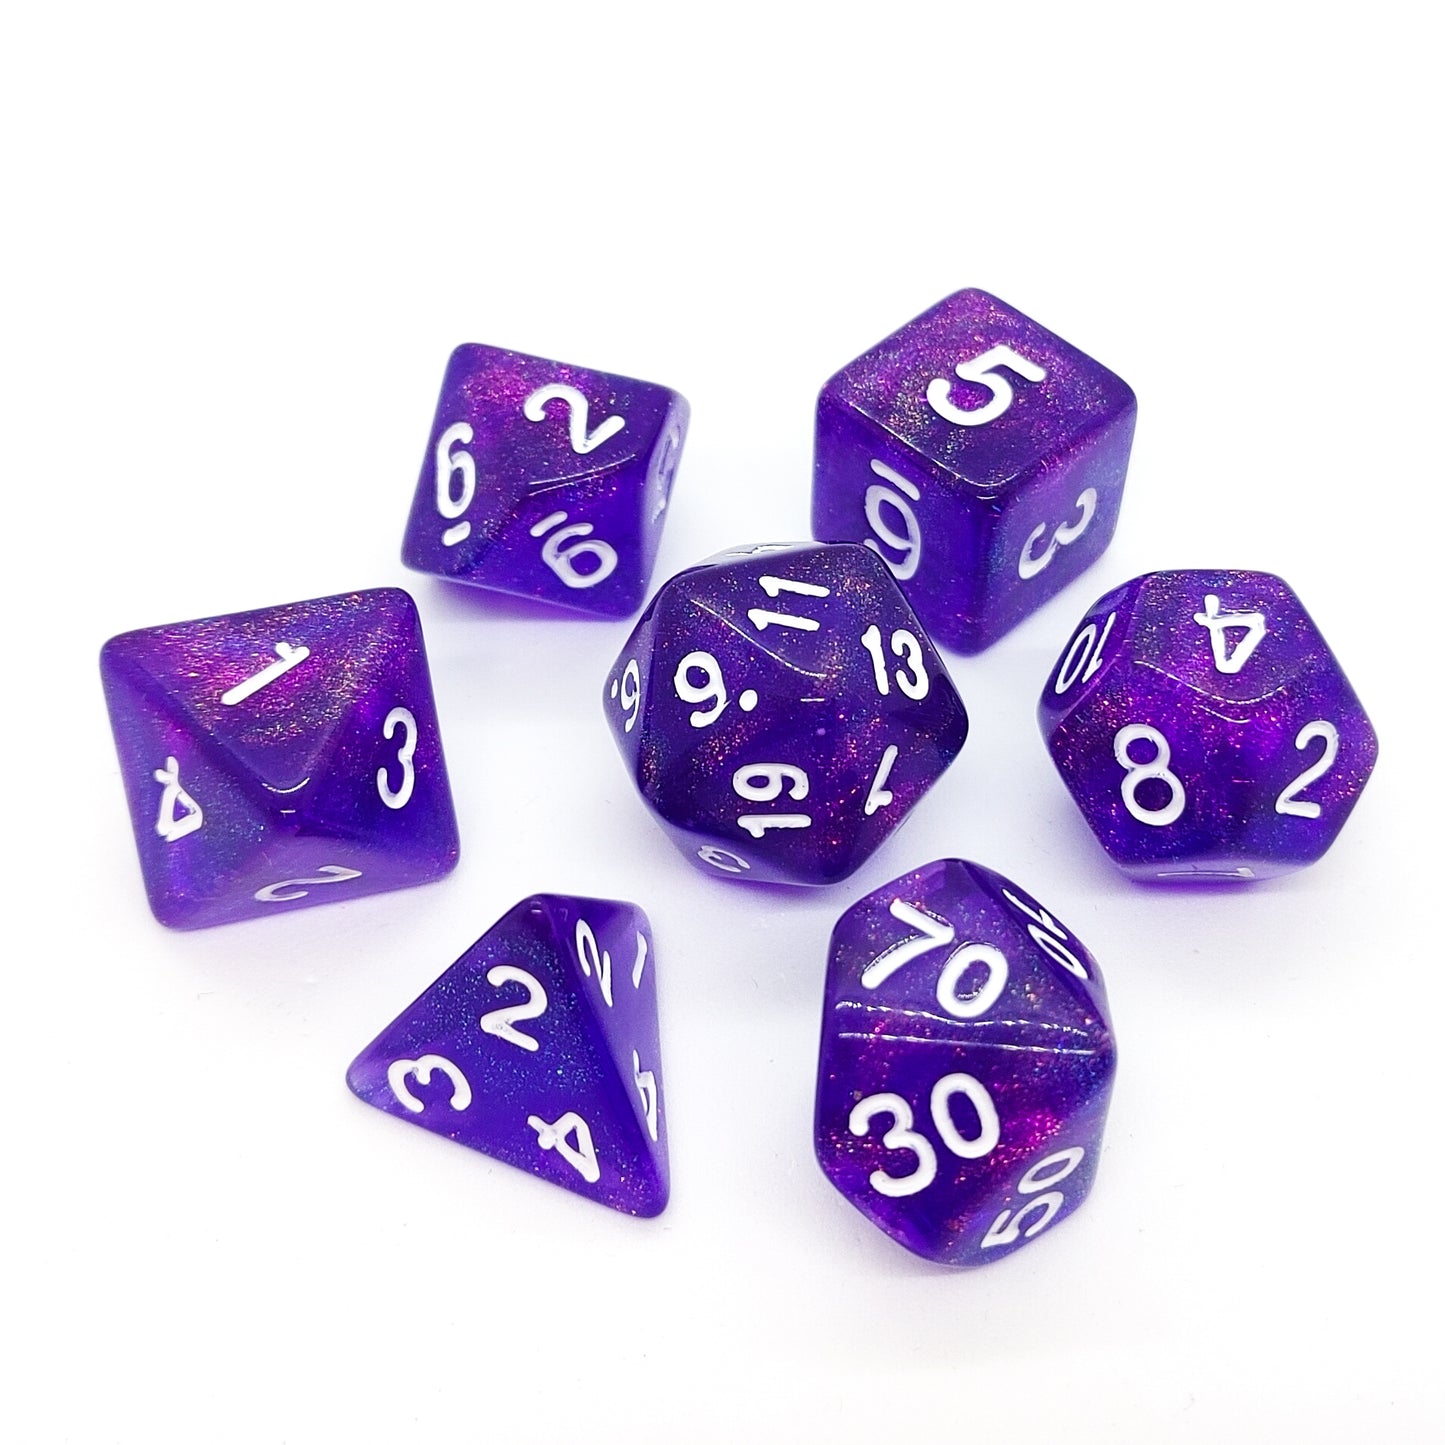 Great Old One - Iridescent dice set - 7 piece RPG dice set